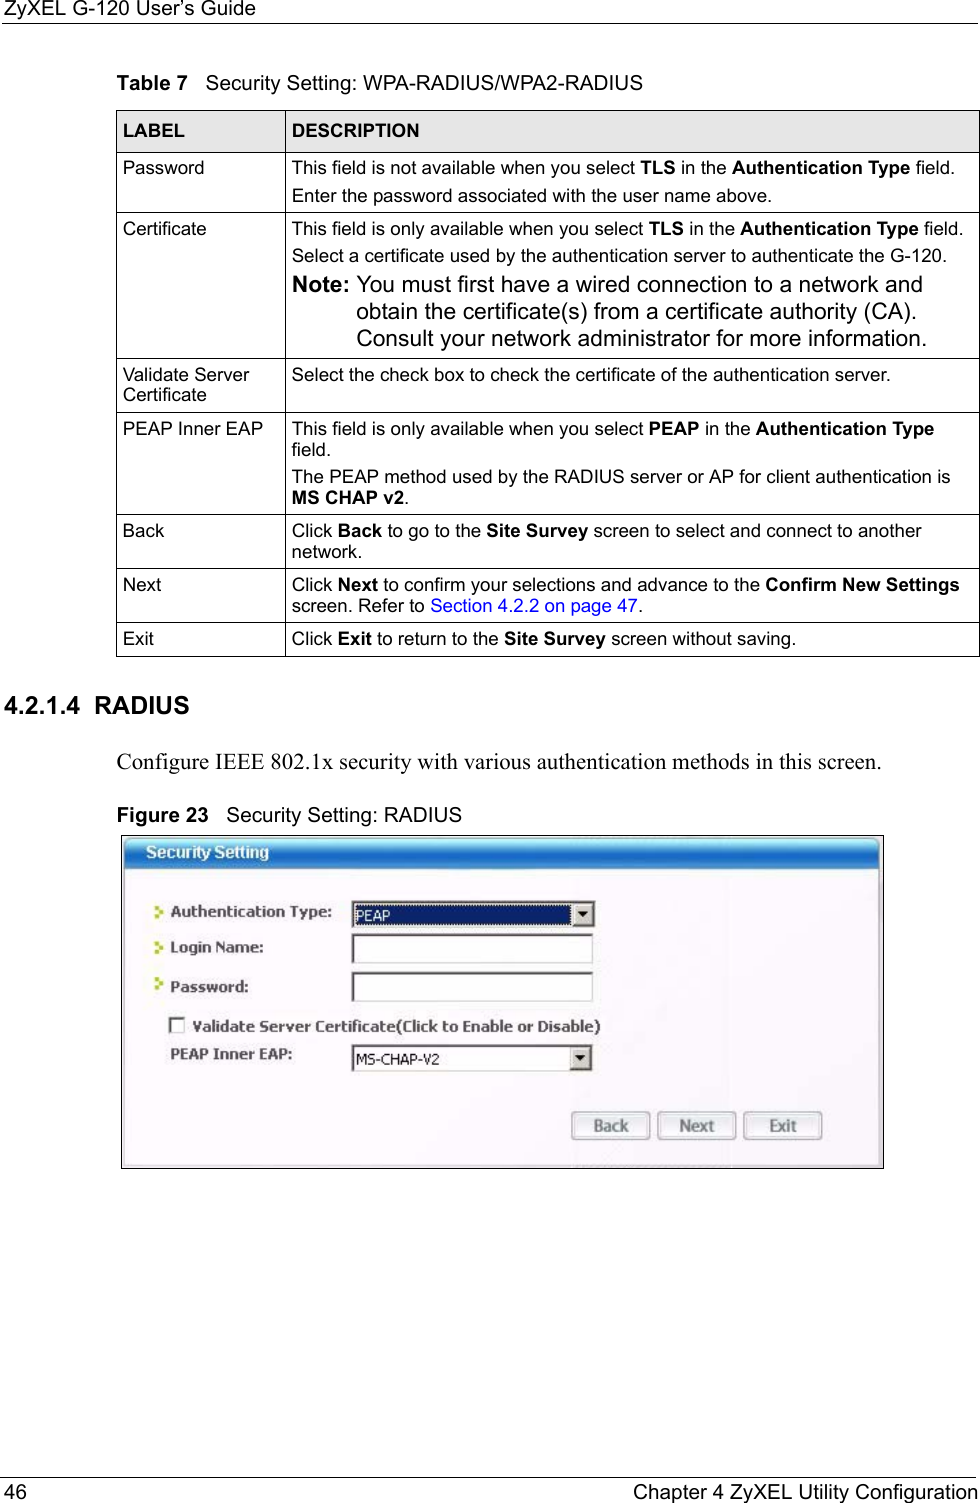 ZyXEL G-120 User’s Guide46 Chapter 4 ZyXEL Utility Configuration4.2.1.4  RADIUSConfigure IEEE 802.1x security with various authentication methods in this screen. Figure 23   Security Setting: RADIUS Password This field is not available when you select TLS in the Authentication Type field. Enter the password associated with the user name above. Certificate This field is only available when you select TLS in the Authentication Type field. Select a certificate used by the authentication server to authenticate the G-120.Note: You must first have a wired connection to a network and obtain the certificate(s) from a certificate authority (CA). Consult your network administrator for more information.Validate Server CertificateSelect the check box to check the certificate of the authentication server.PEAP Inner EAP This field is only available when you select PEAP in the Authentication Type field.The PEAP method used by the RADIUS server or AP for client authentication is MS CHAP v2.Back Click Back to go to the Site Survey screen to select and connect to another network.Next Click Next to confirm your selections and advance to the Confirm New Settings screen. Refer to Section 4.2.2 on page 47. Exit Click Exit to return to the Site Survey screen without saving.Table 7   Security Setting: WPA-RADIUS/WPA2-RADIUSLABEL DESCRIPTION